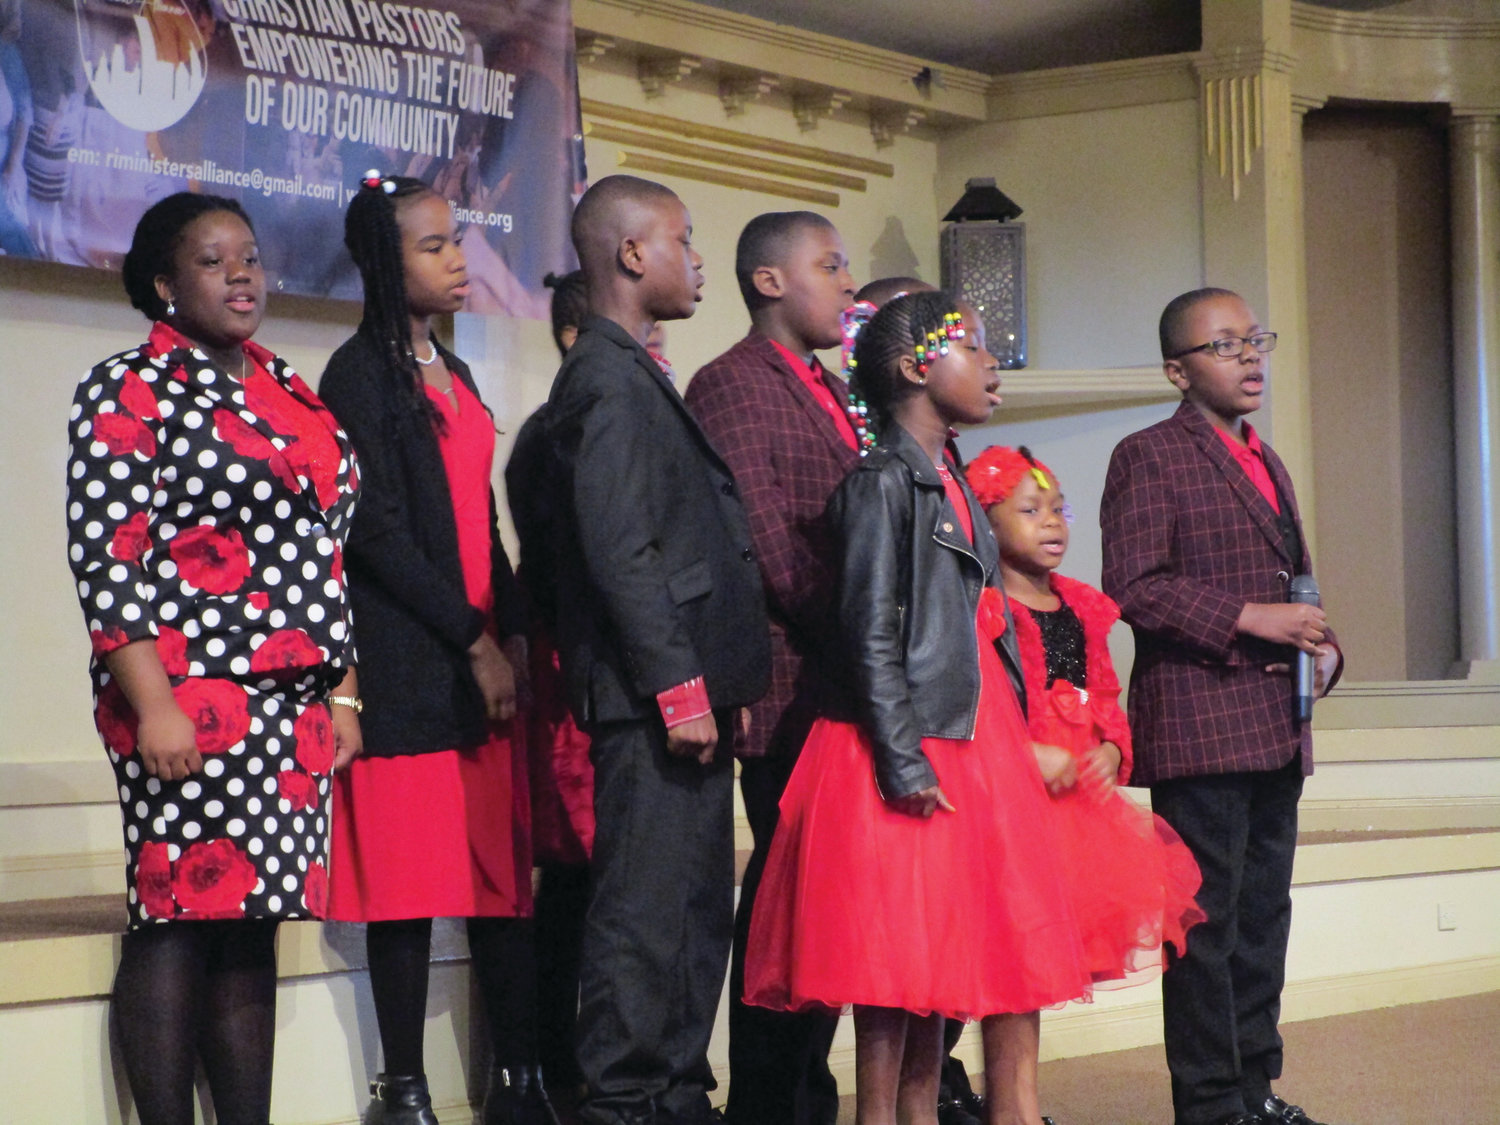 CELEBRATING WITH SONG: Members of Unity Chapel Children’s Ministry provided musical entertainment before Carlon Howard’s keynote address during Monday’s MLK Day Scholarship Breakfast.